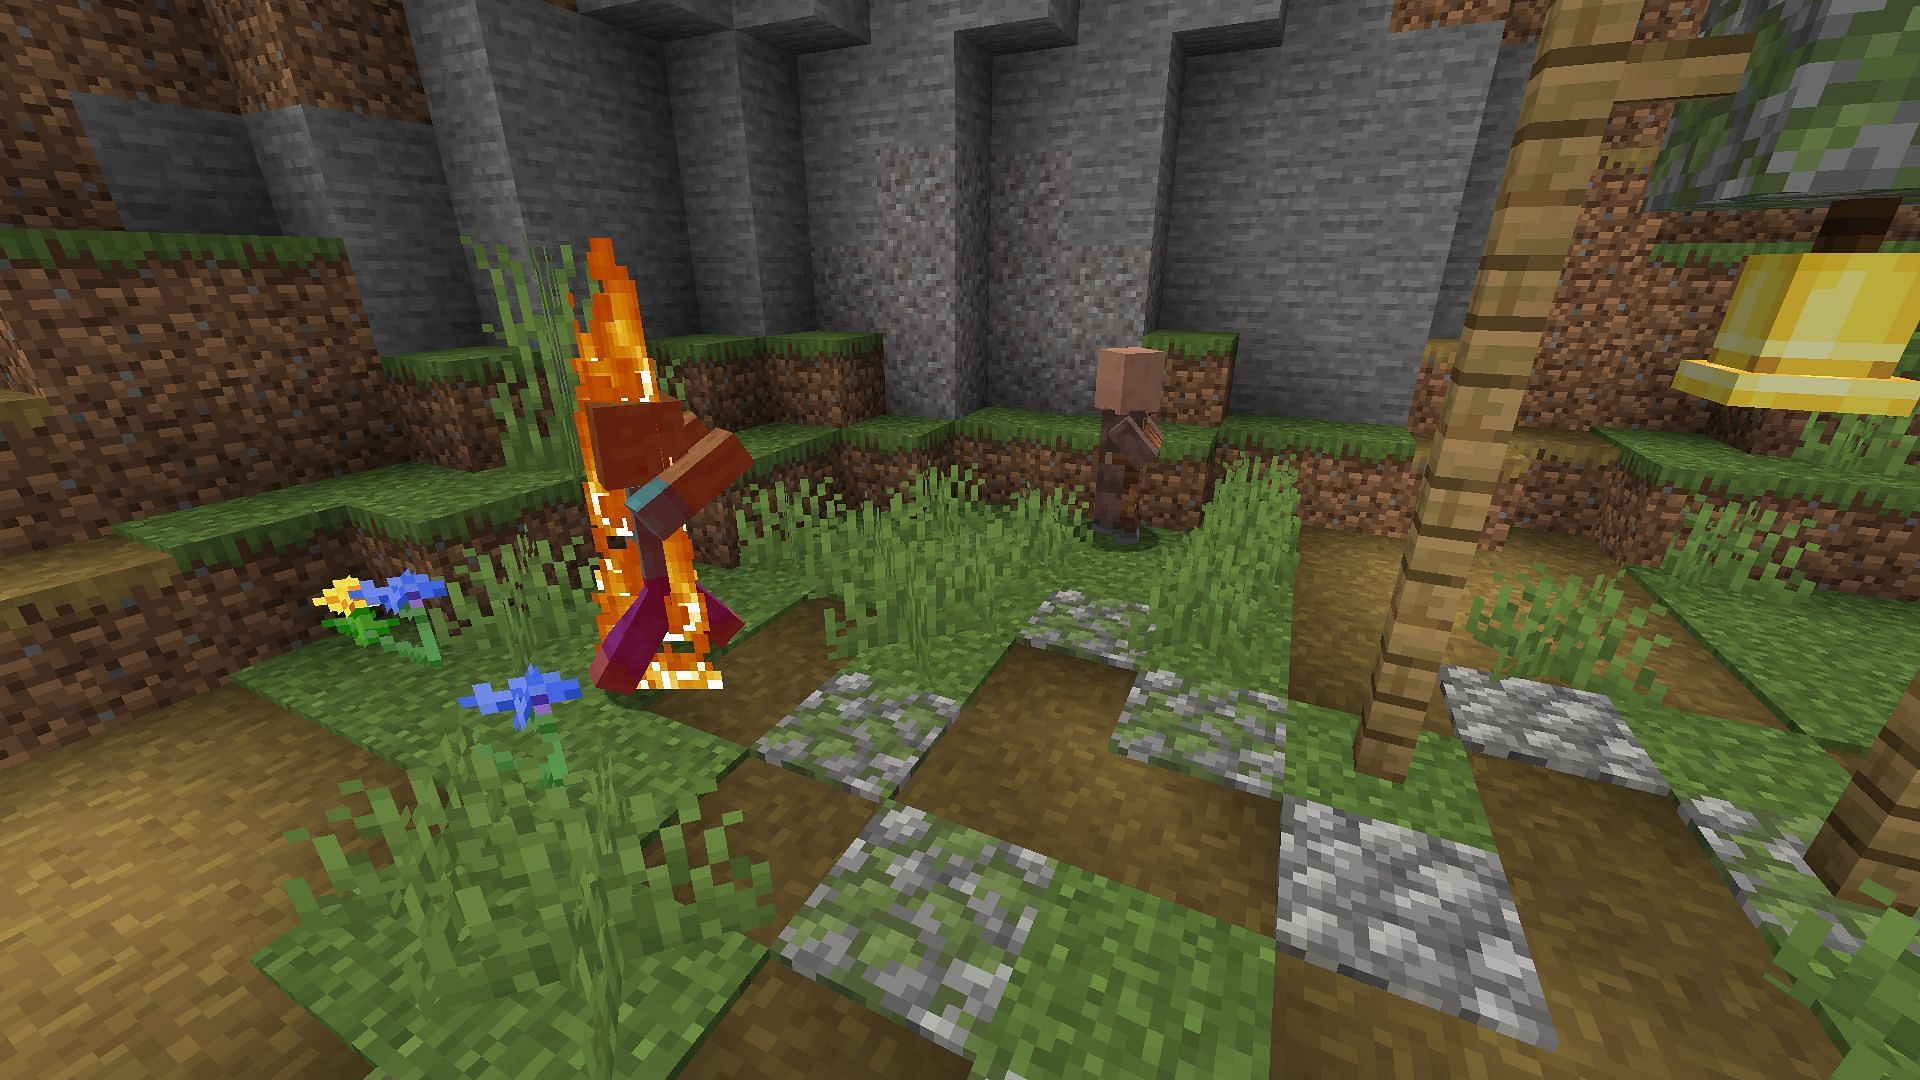 A villager running away from a zombie (Image via Mojang)